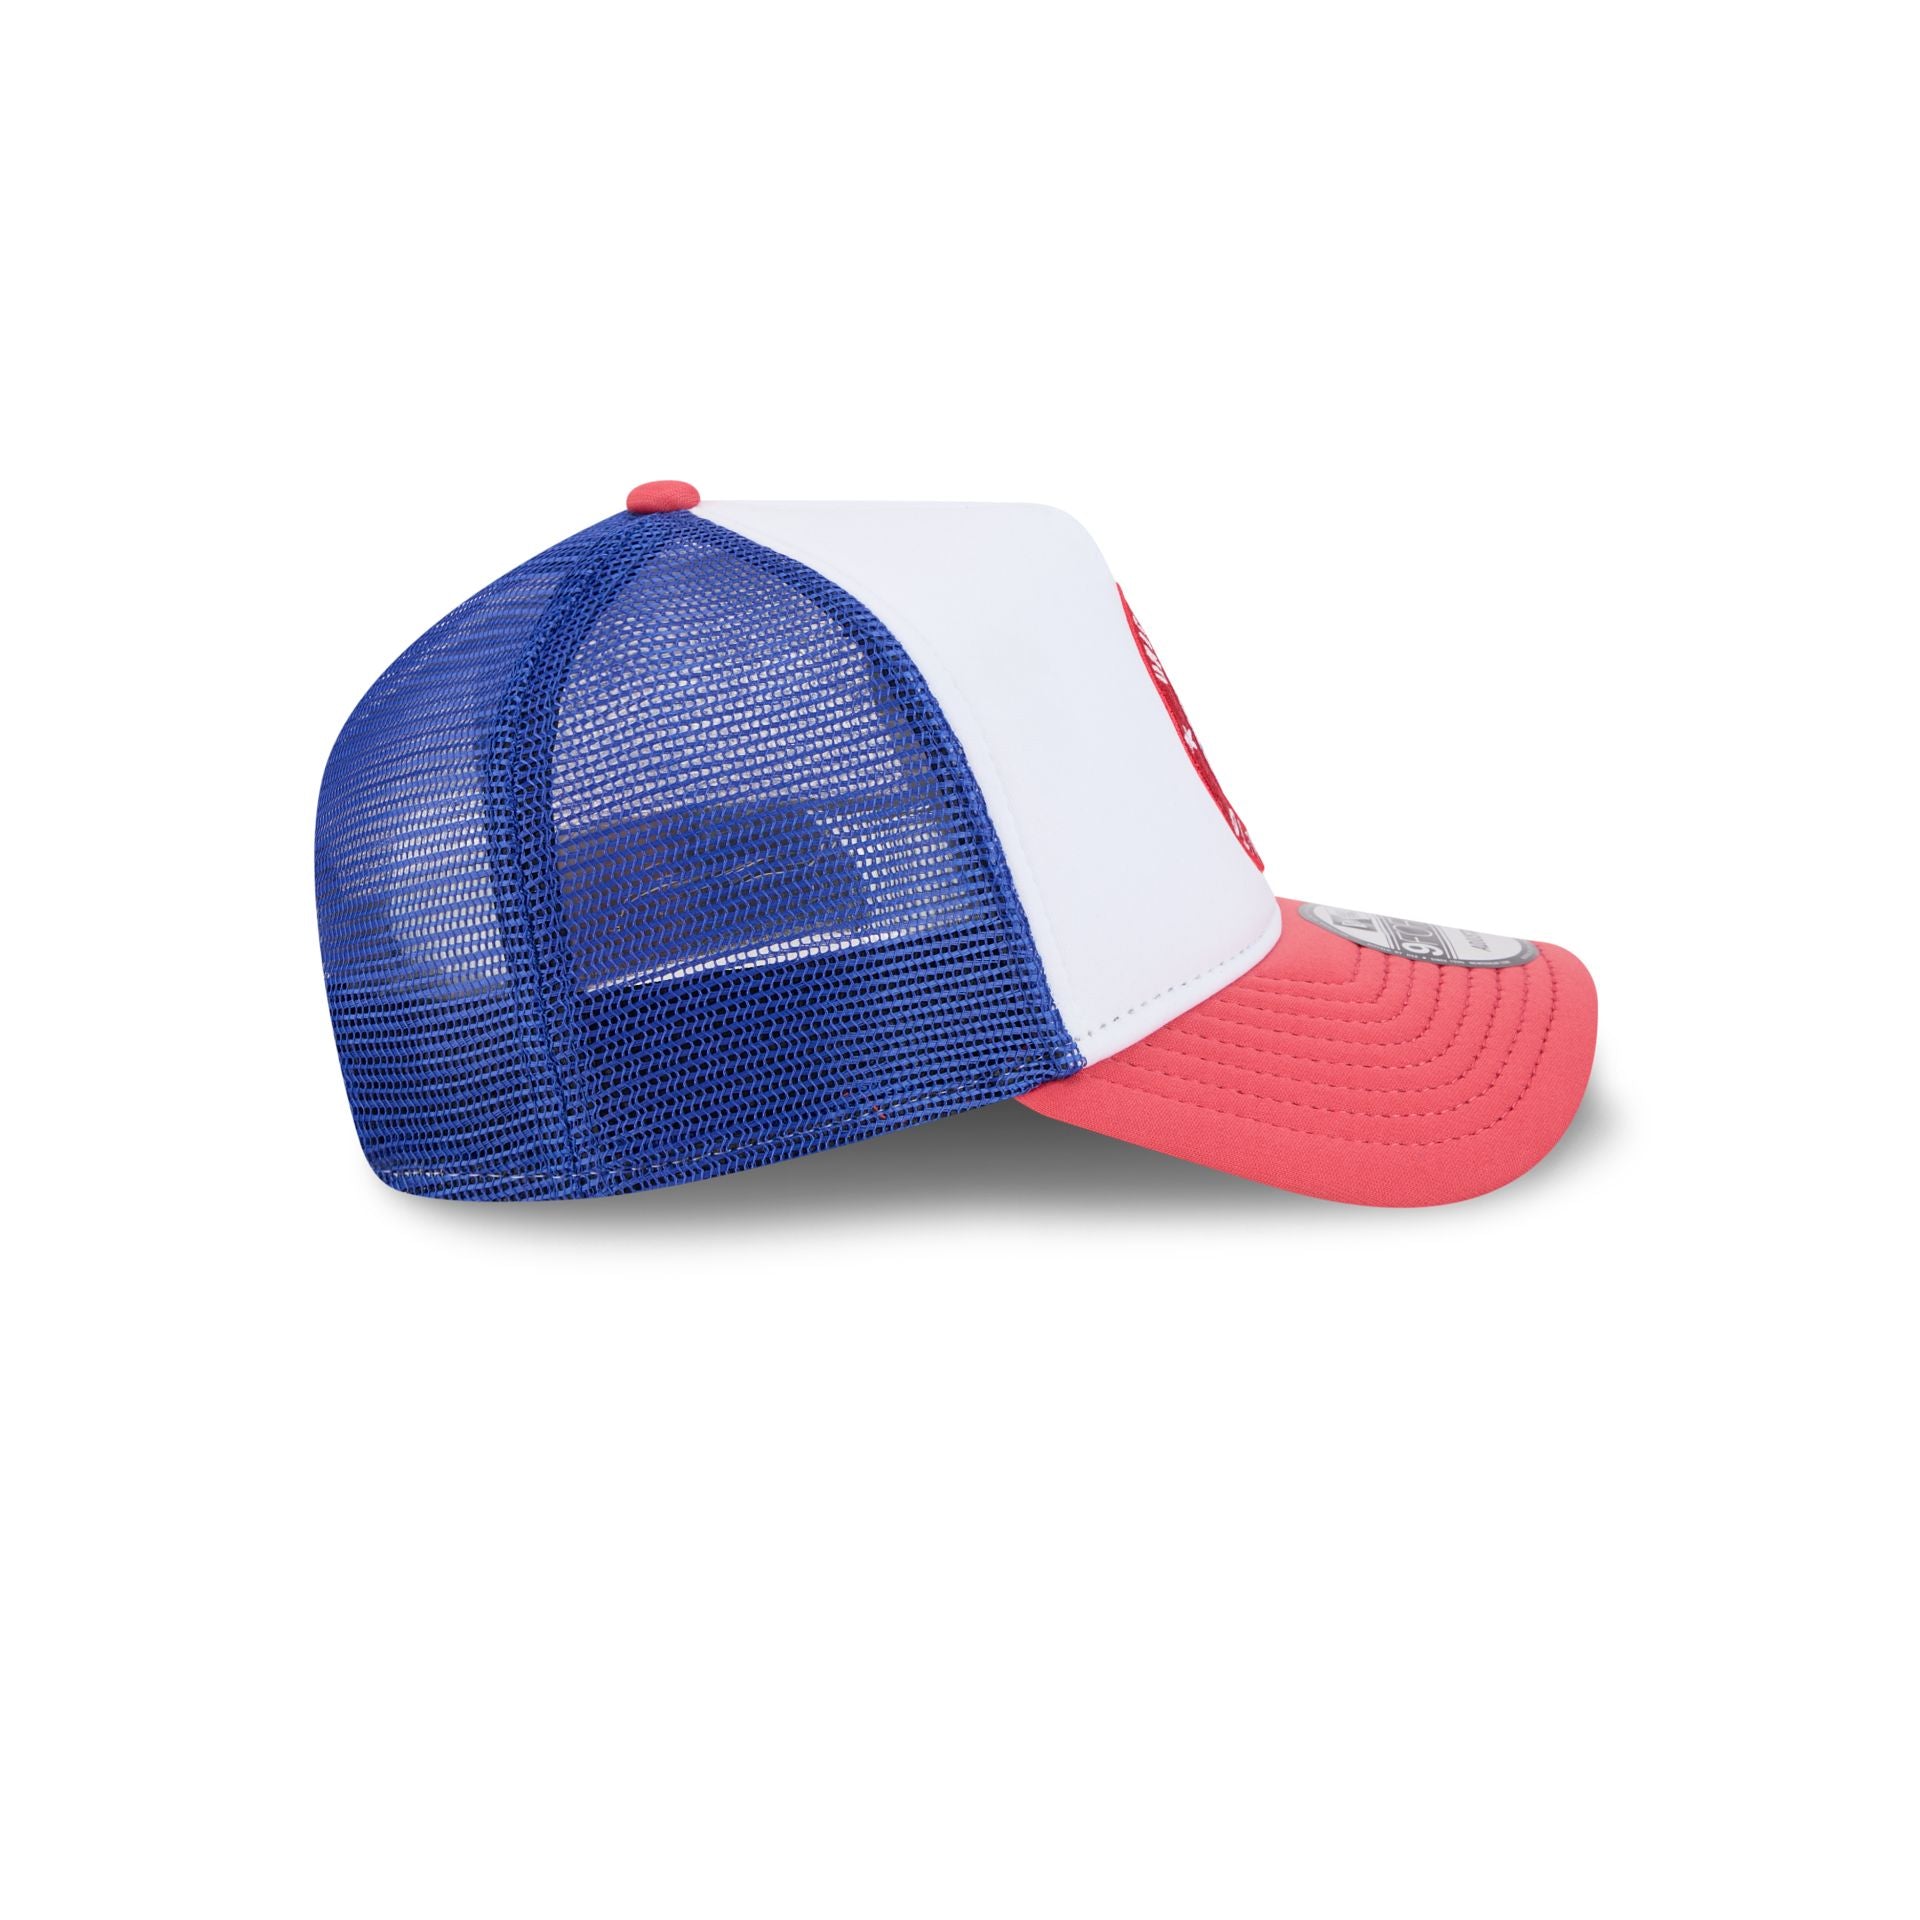 Team USA Olympics White 9FORTY A-Frame Trucker Hat